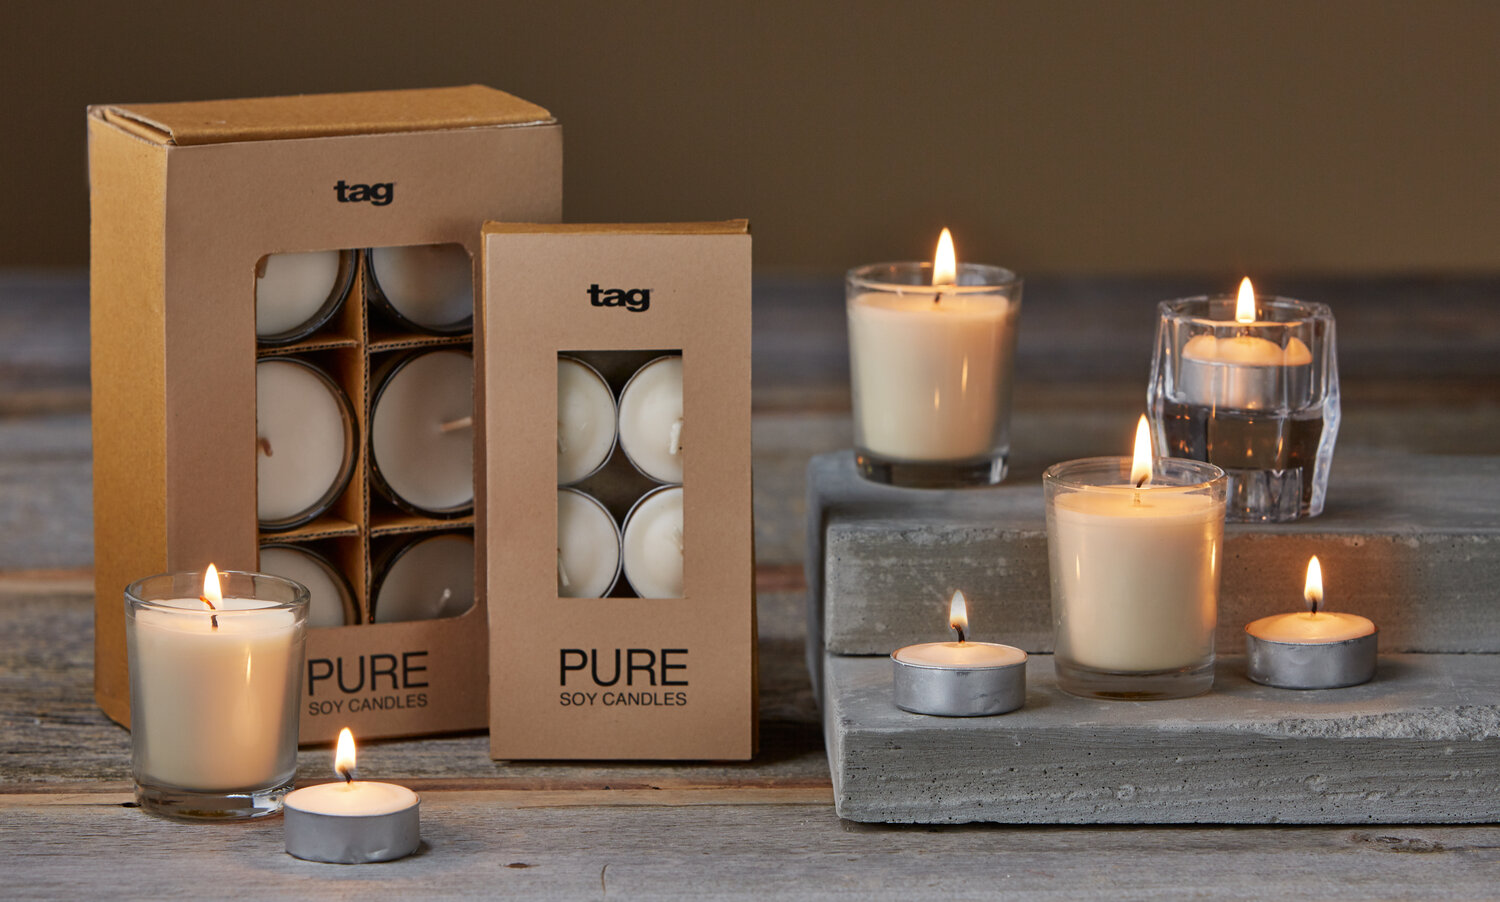 tealights & votive candles: know the difference, get the best burn